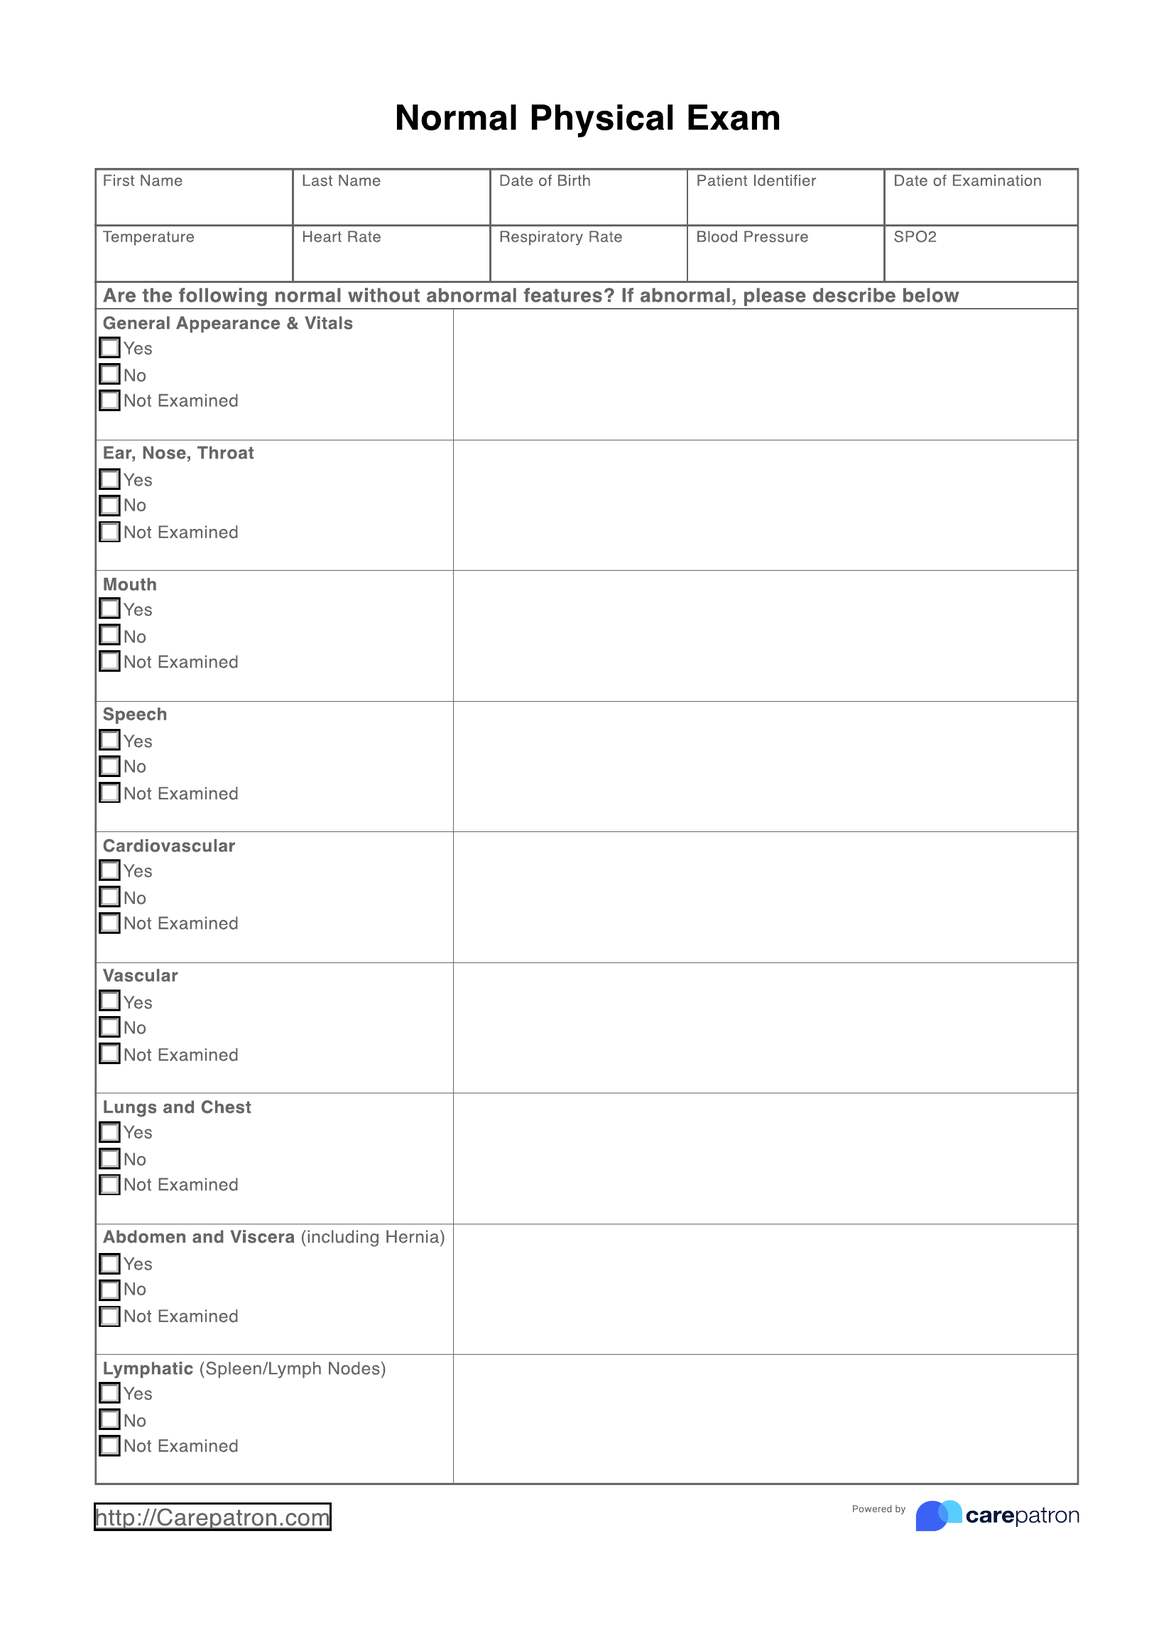 Normal Physical Exam Template PDF Example